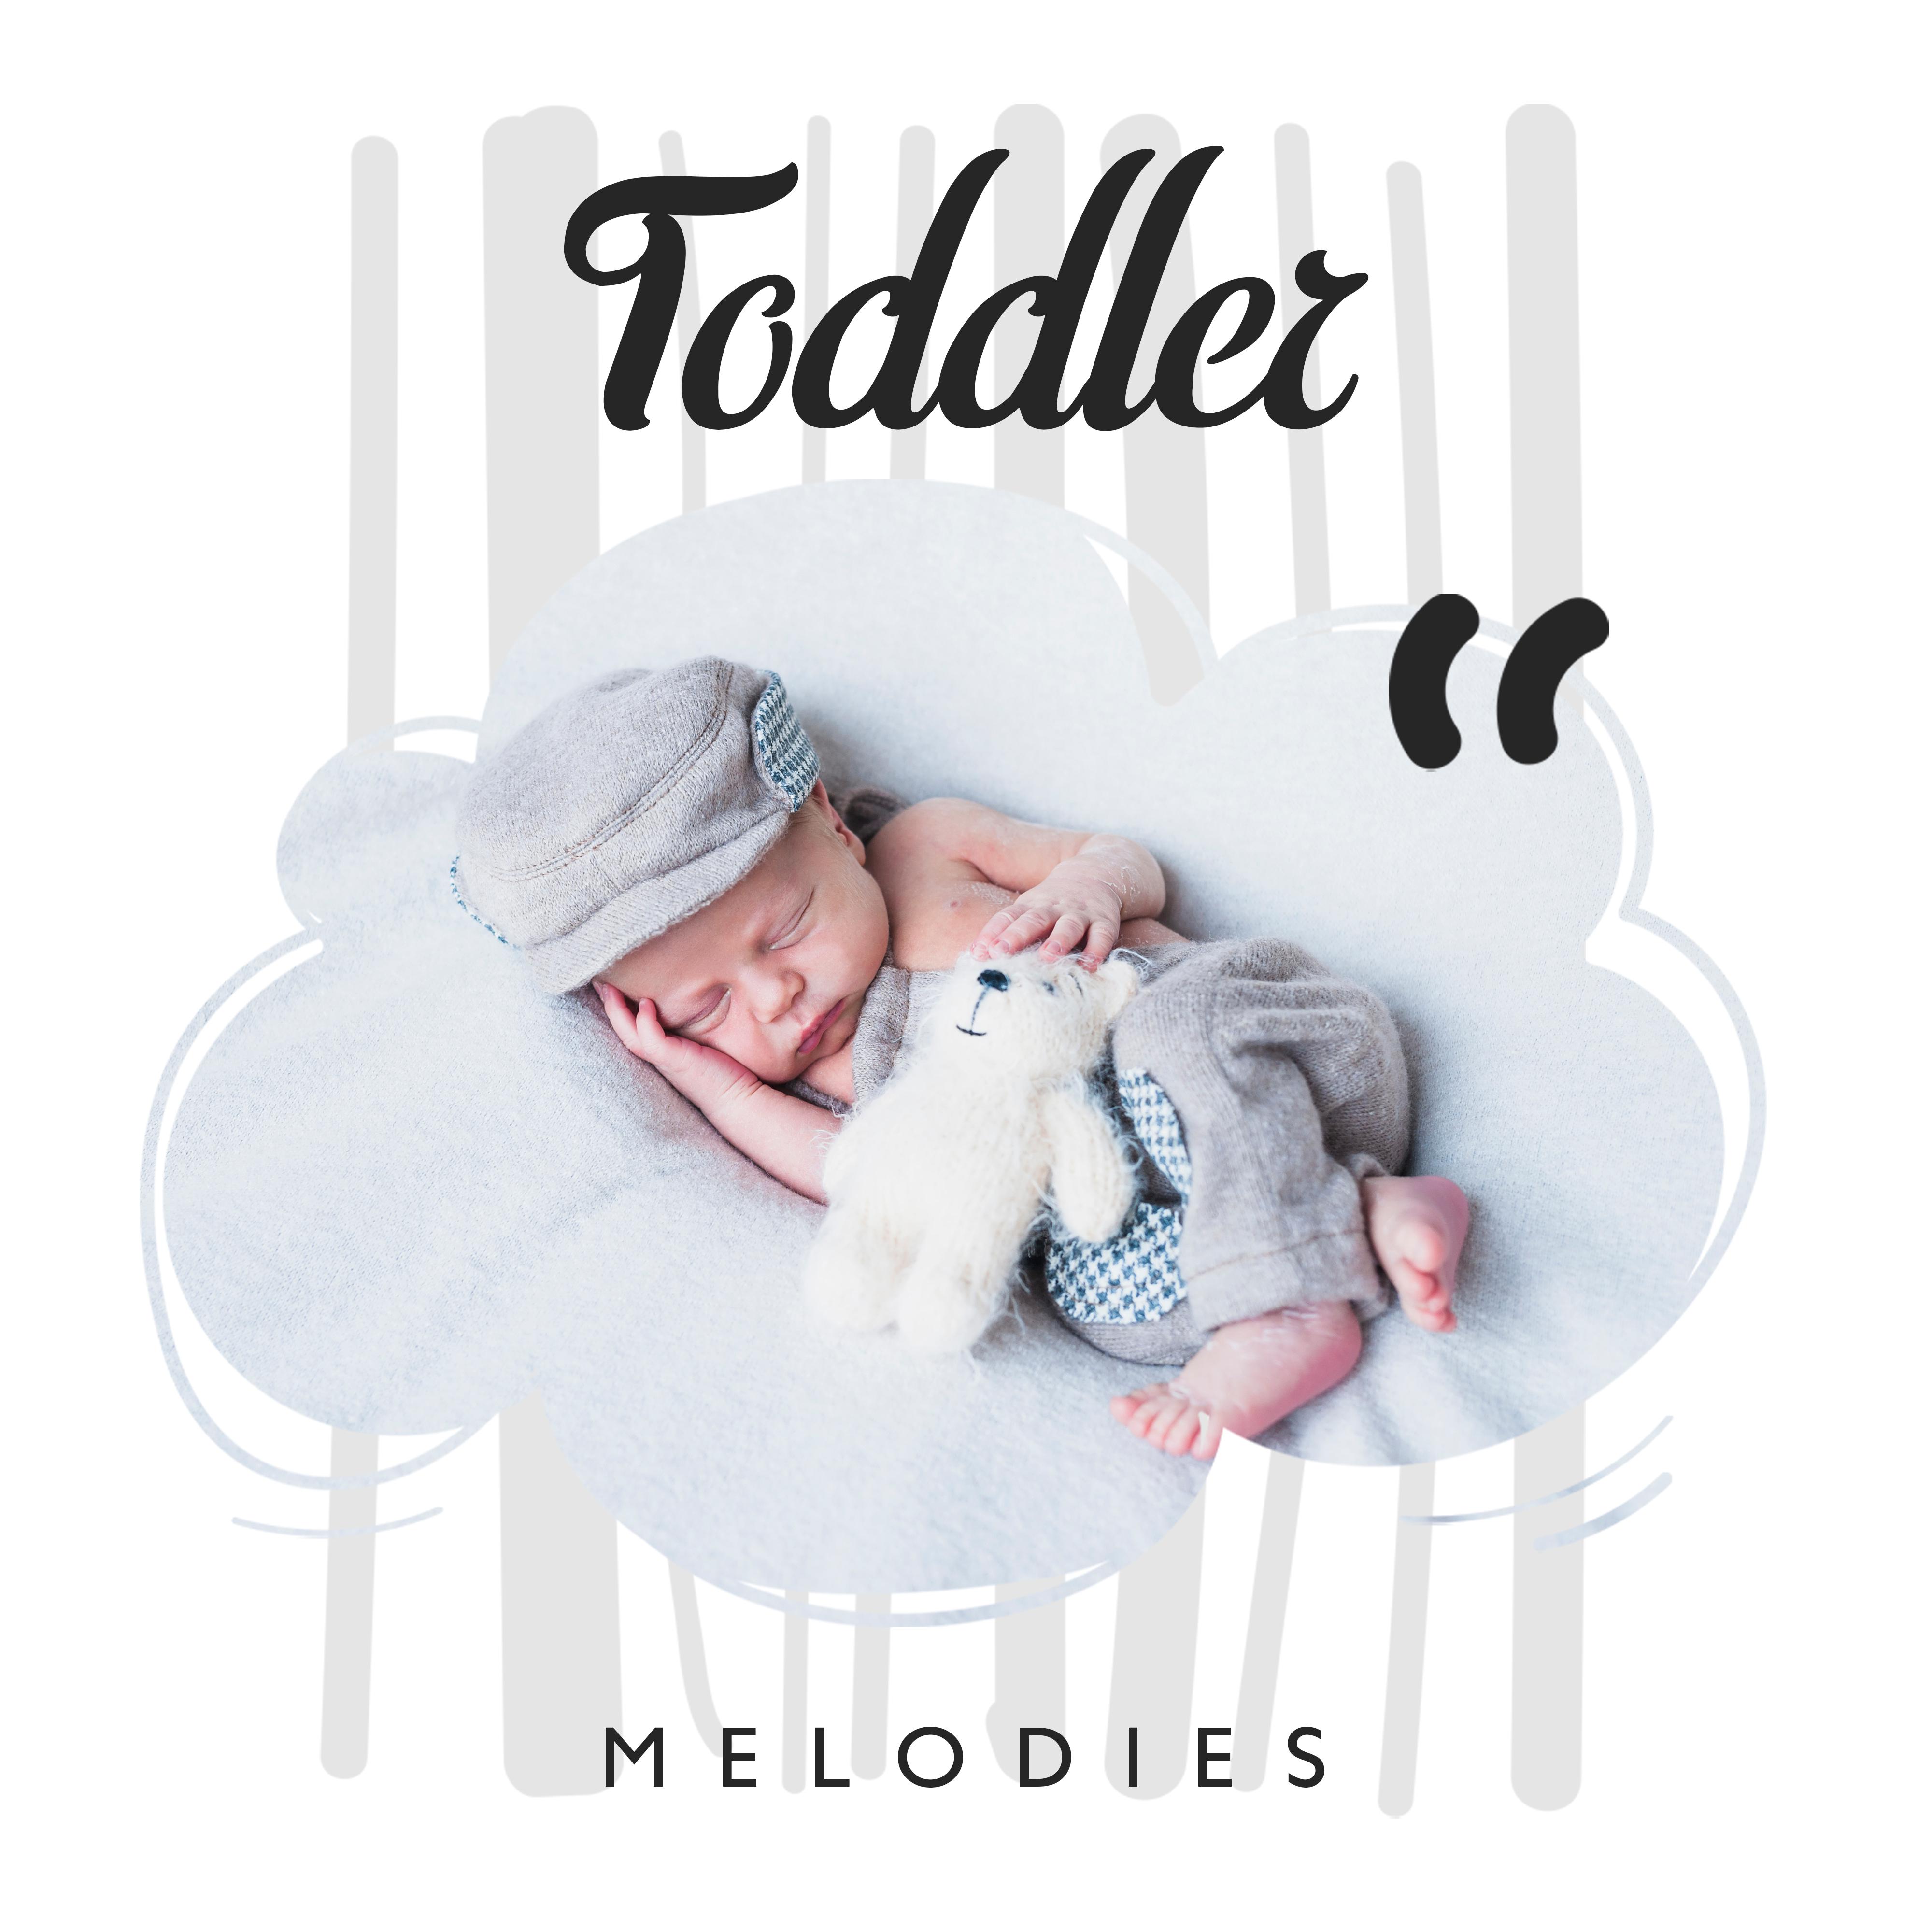 Toddler Melodies: Gentle Lullabies for Relaxation 2019